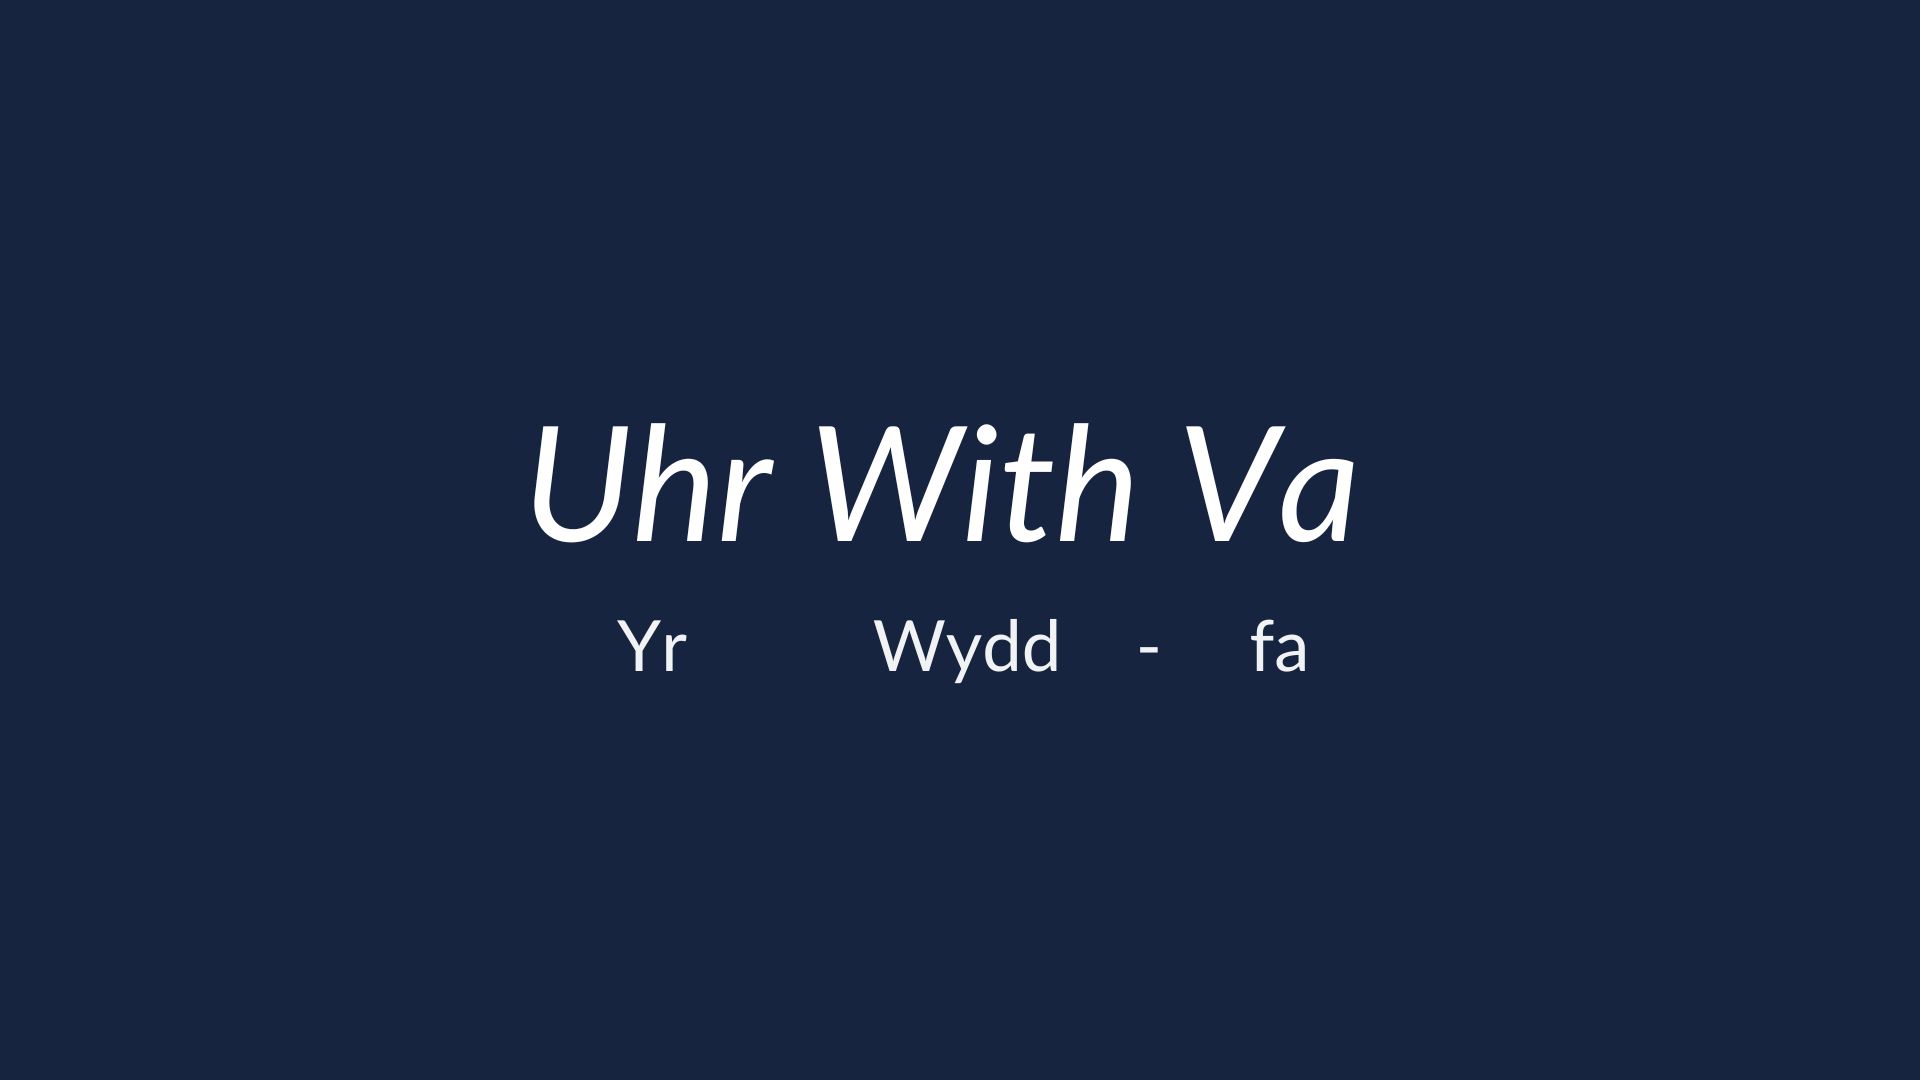 Graphic showing how to pronounce Yr Wyddfa